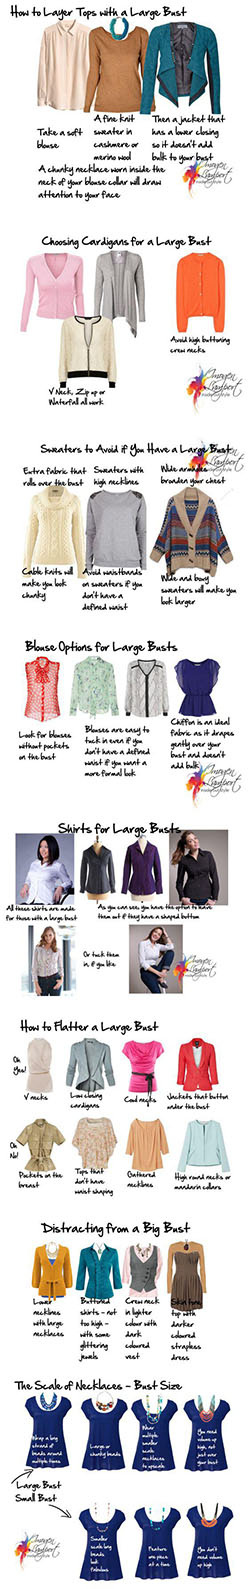 Outfits for beautiful curvy women : Big bust, Imogen Lamport, Wardrobe Therapy, Inside out Style blog, Bespoke Image...: 